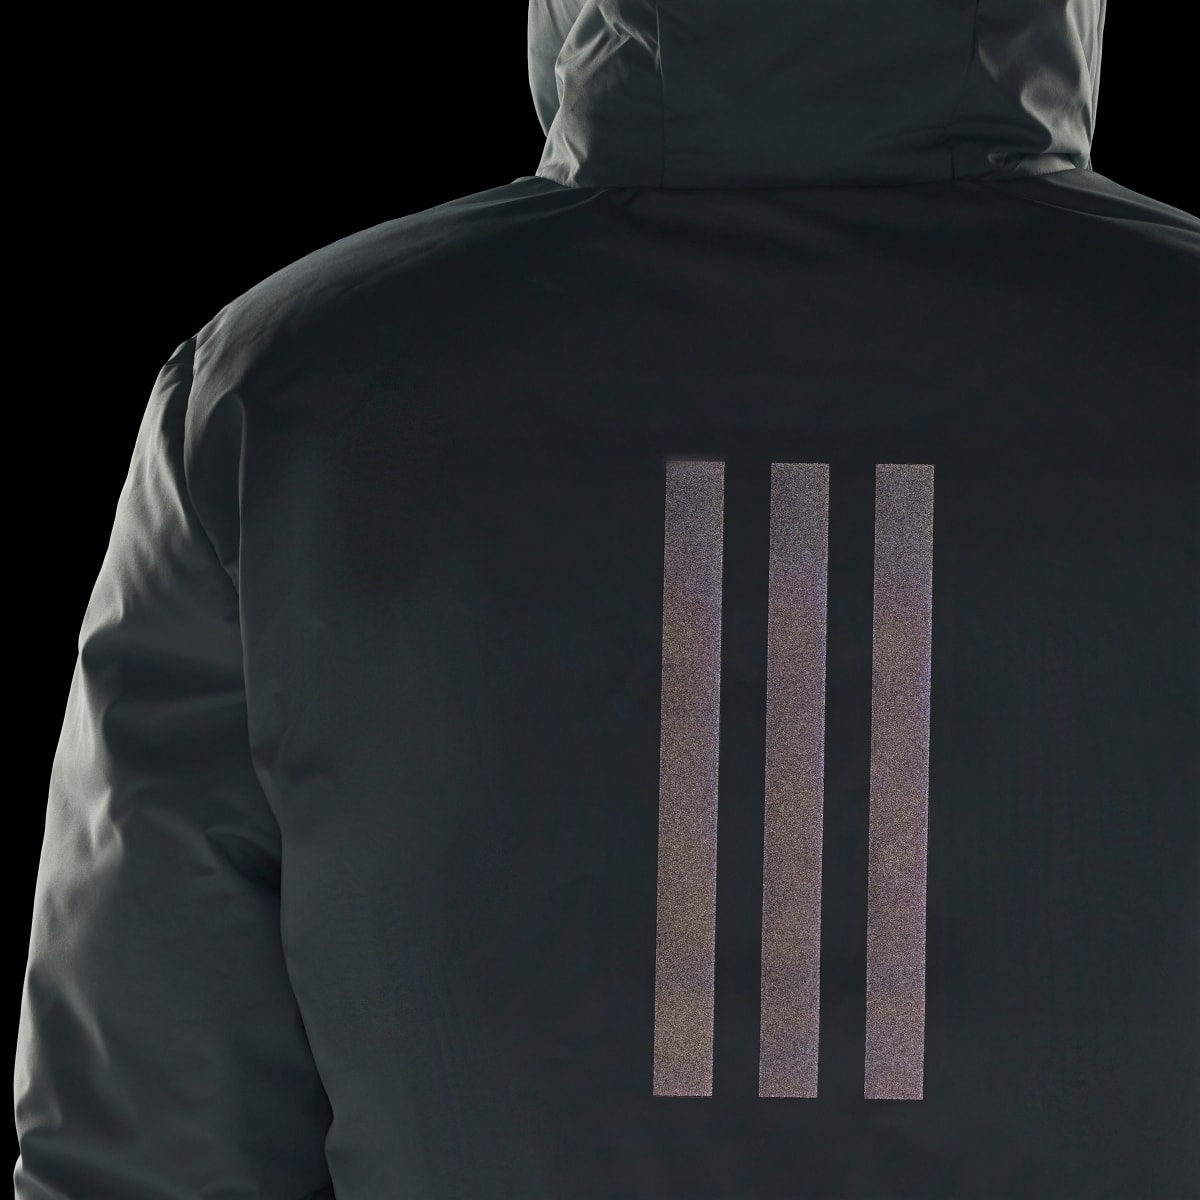 Adidas Traveer COLD.RDY Jacket. 10